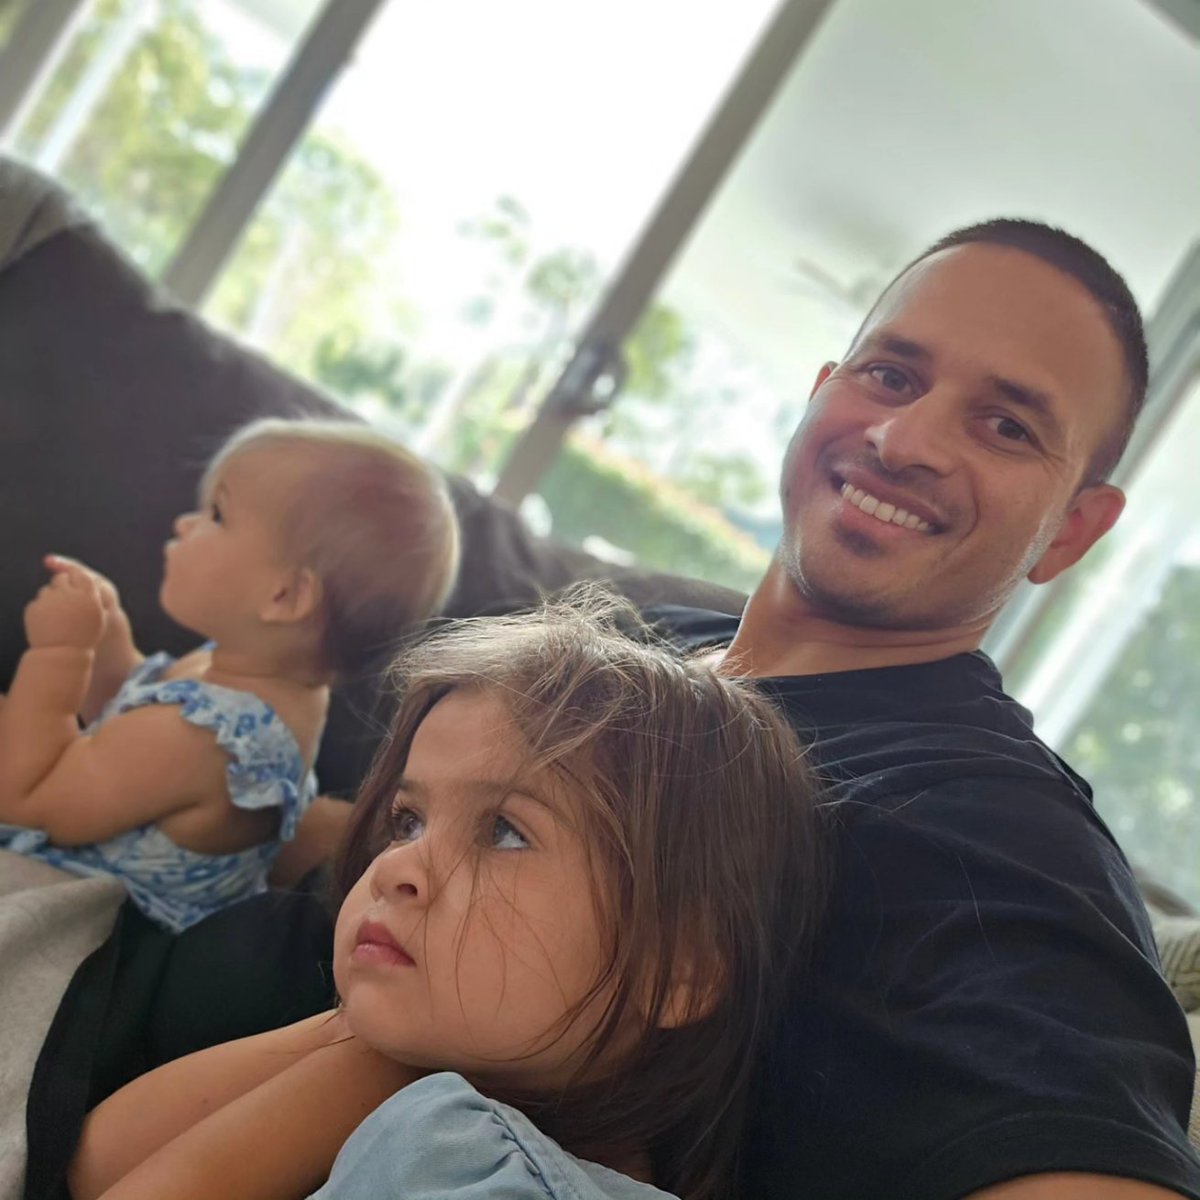 Greatest dad named Usman who lives in Brisbane and plays cricket for Australia. I dare you to find one better! 😑🤗😏 #dadlife #unstoppable #daddysgirls👭